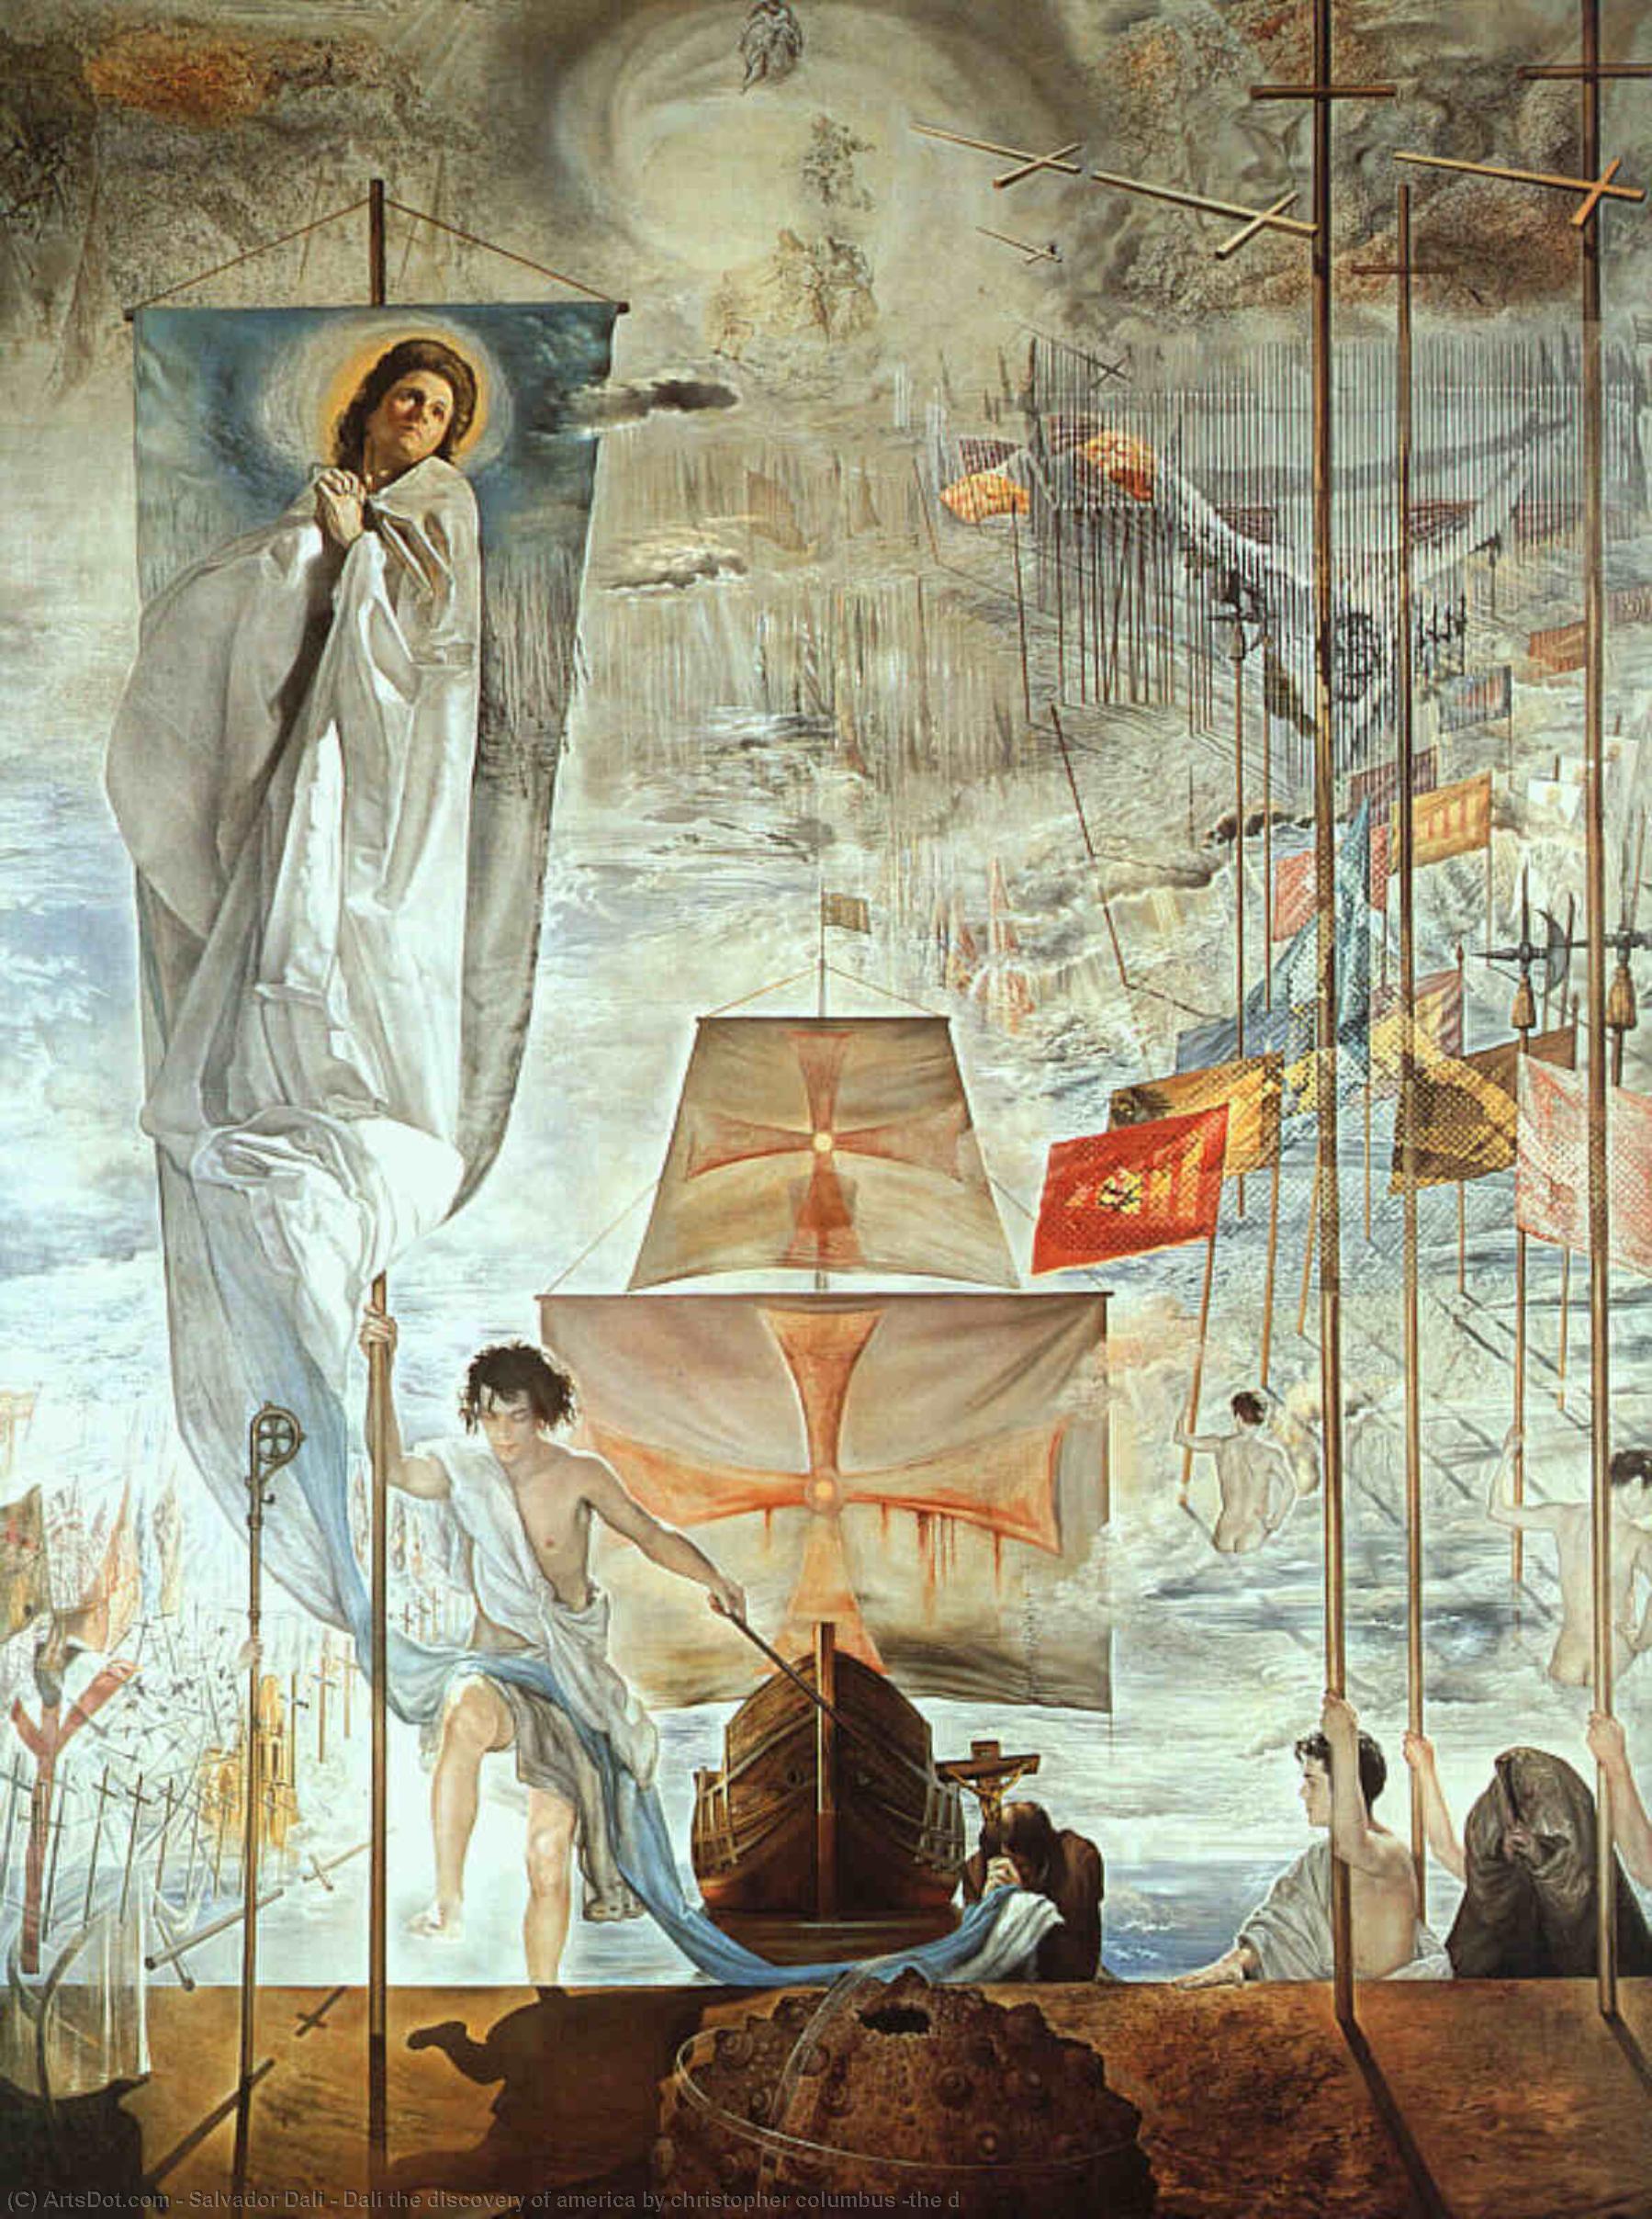 WikiOO.org - Encyclopedia of Fine Arts - Maleri, Artwork Salvador Dali - Dalí the discovery of america by christopher columbus (the d